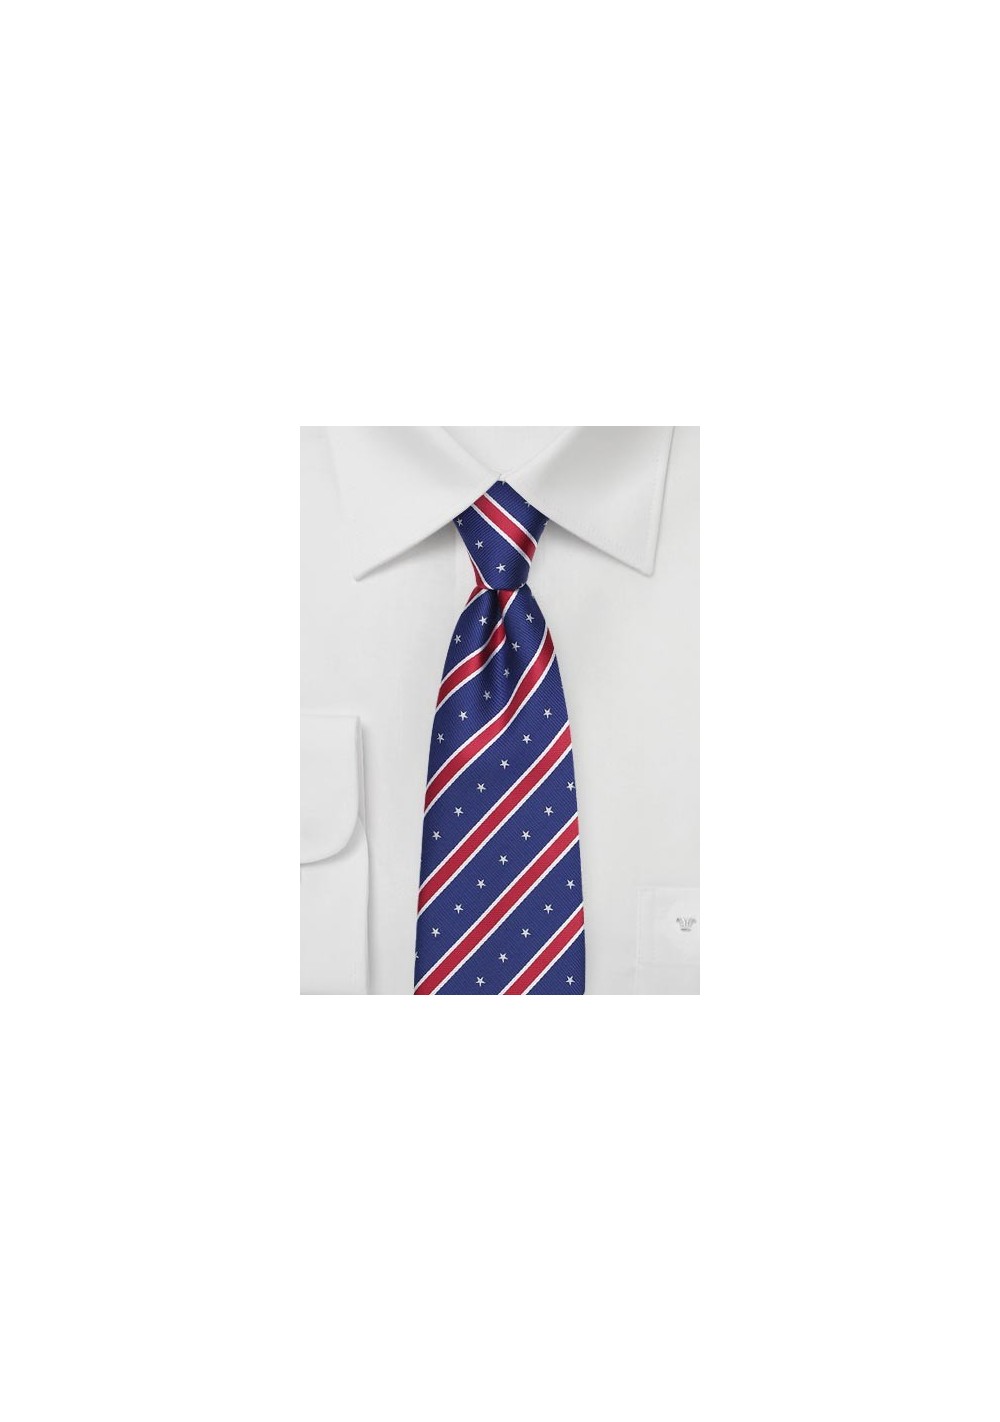 Red, White, and Blue Striped Tie with Embroidered Stars